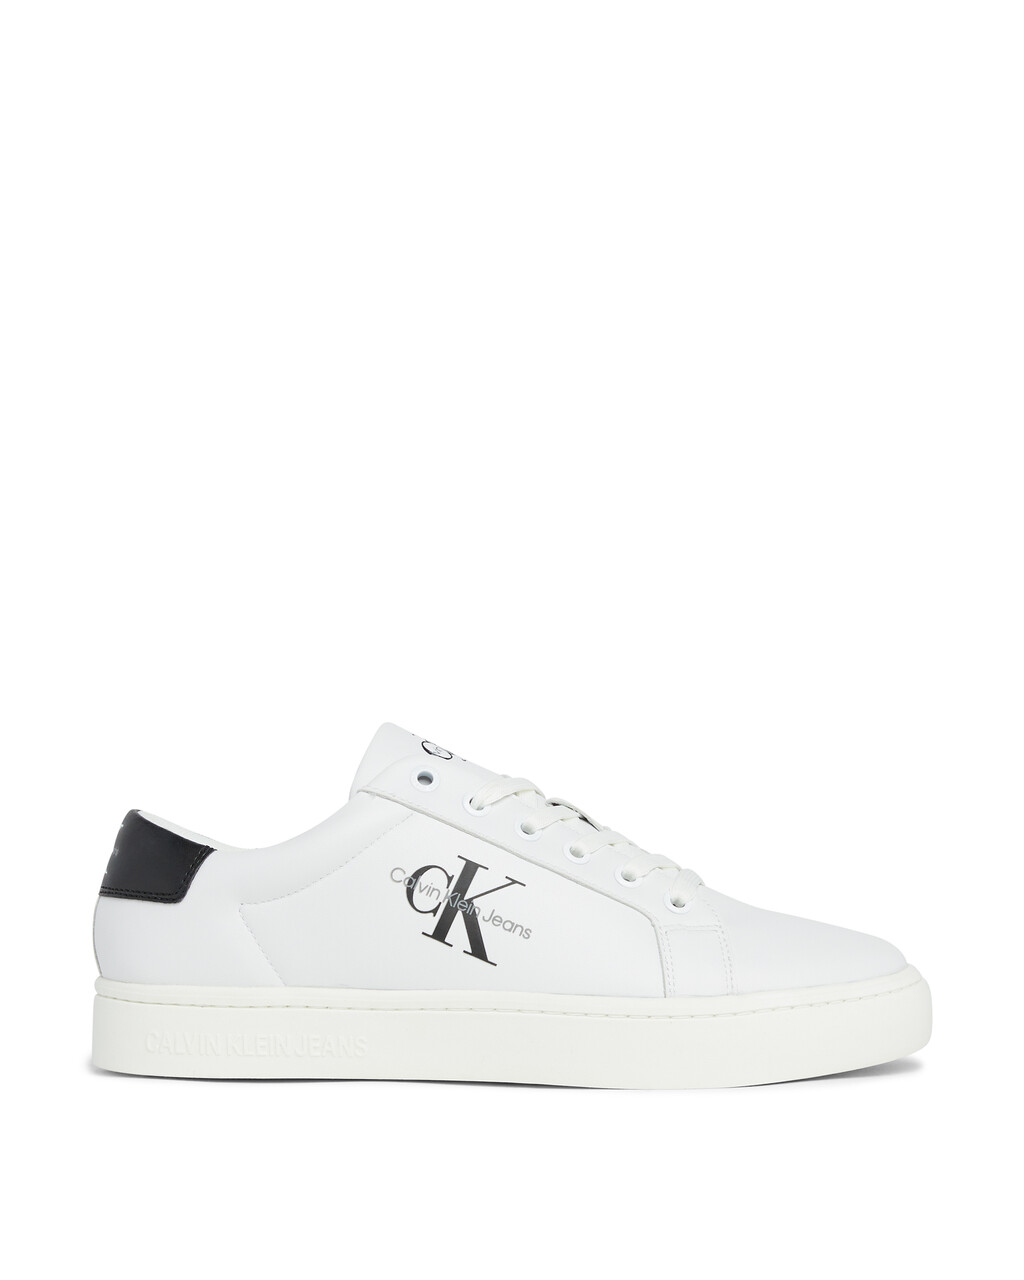 Leather Trainers, Bright White/Black, hi-res